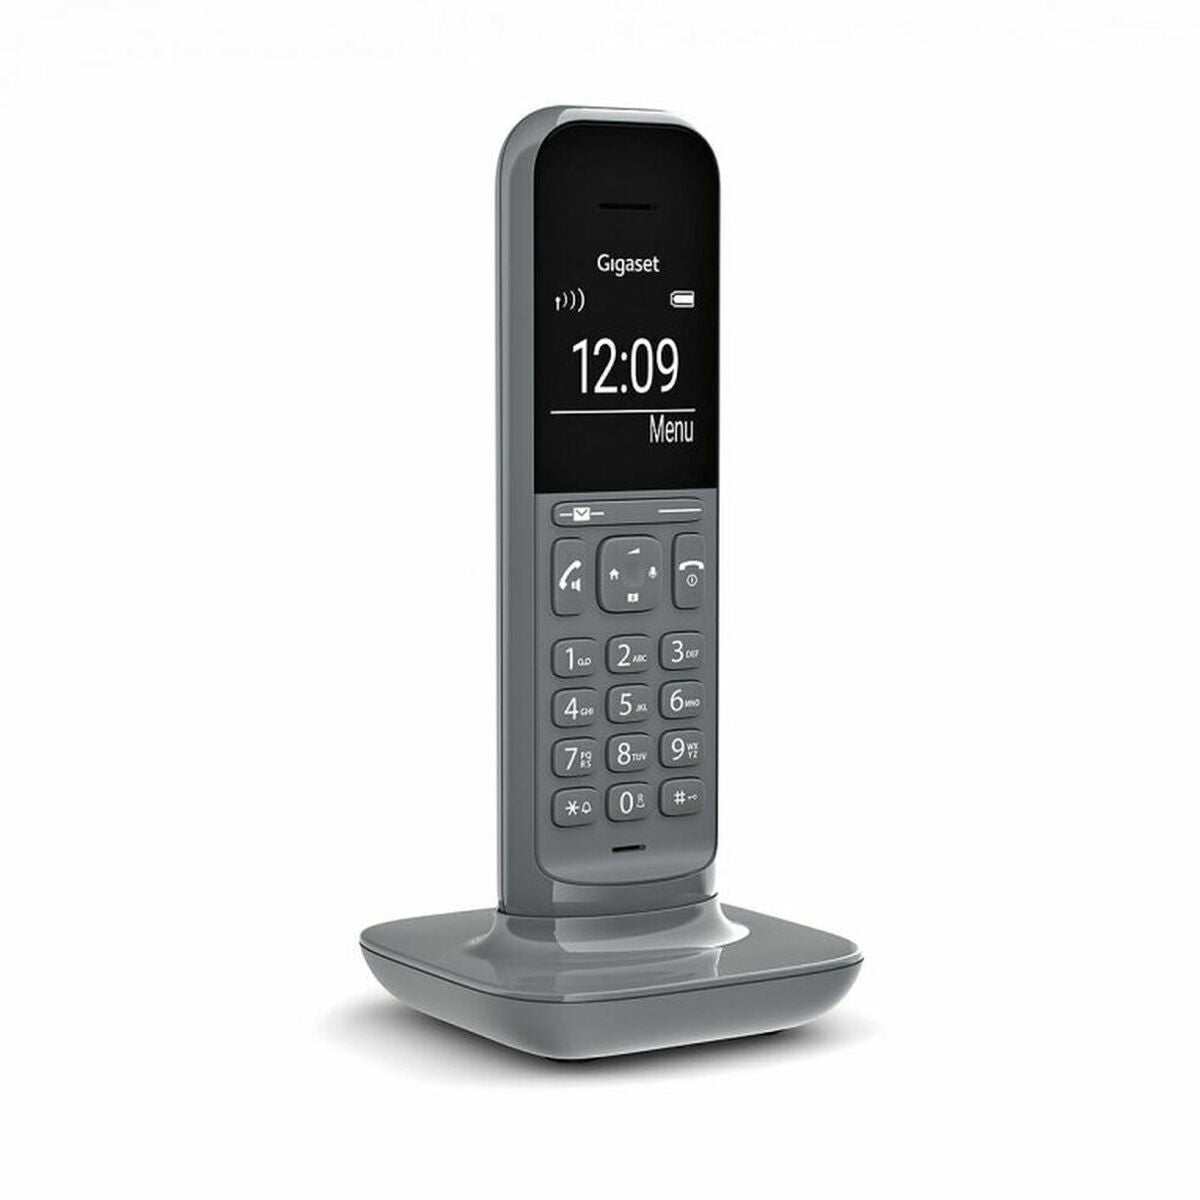 Wireless Phone Gigaset S30852-H2902-D203 Grey, Gigaset, Electronics, Landline telephones and accessories, wireless-phone-gigaset-s30852-h2902-d203-grey-1, black friday / cyber monday, Brand_Gigaset, category-reference-2609, category-reference-2617, category-reference-2619, category-reference-t-18372, category-reference-t-18382, category-reference-t-19653, Condition_NEW, office, Price_50 - 100, telephones & tablets, Teleworking, RiotNook